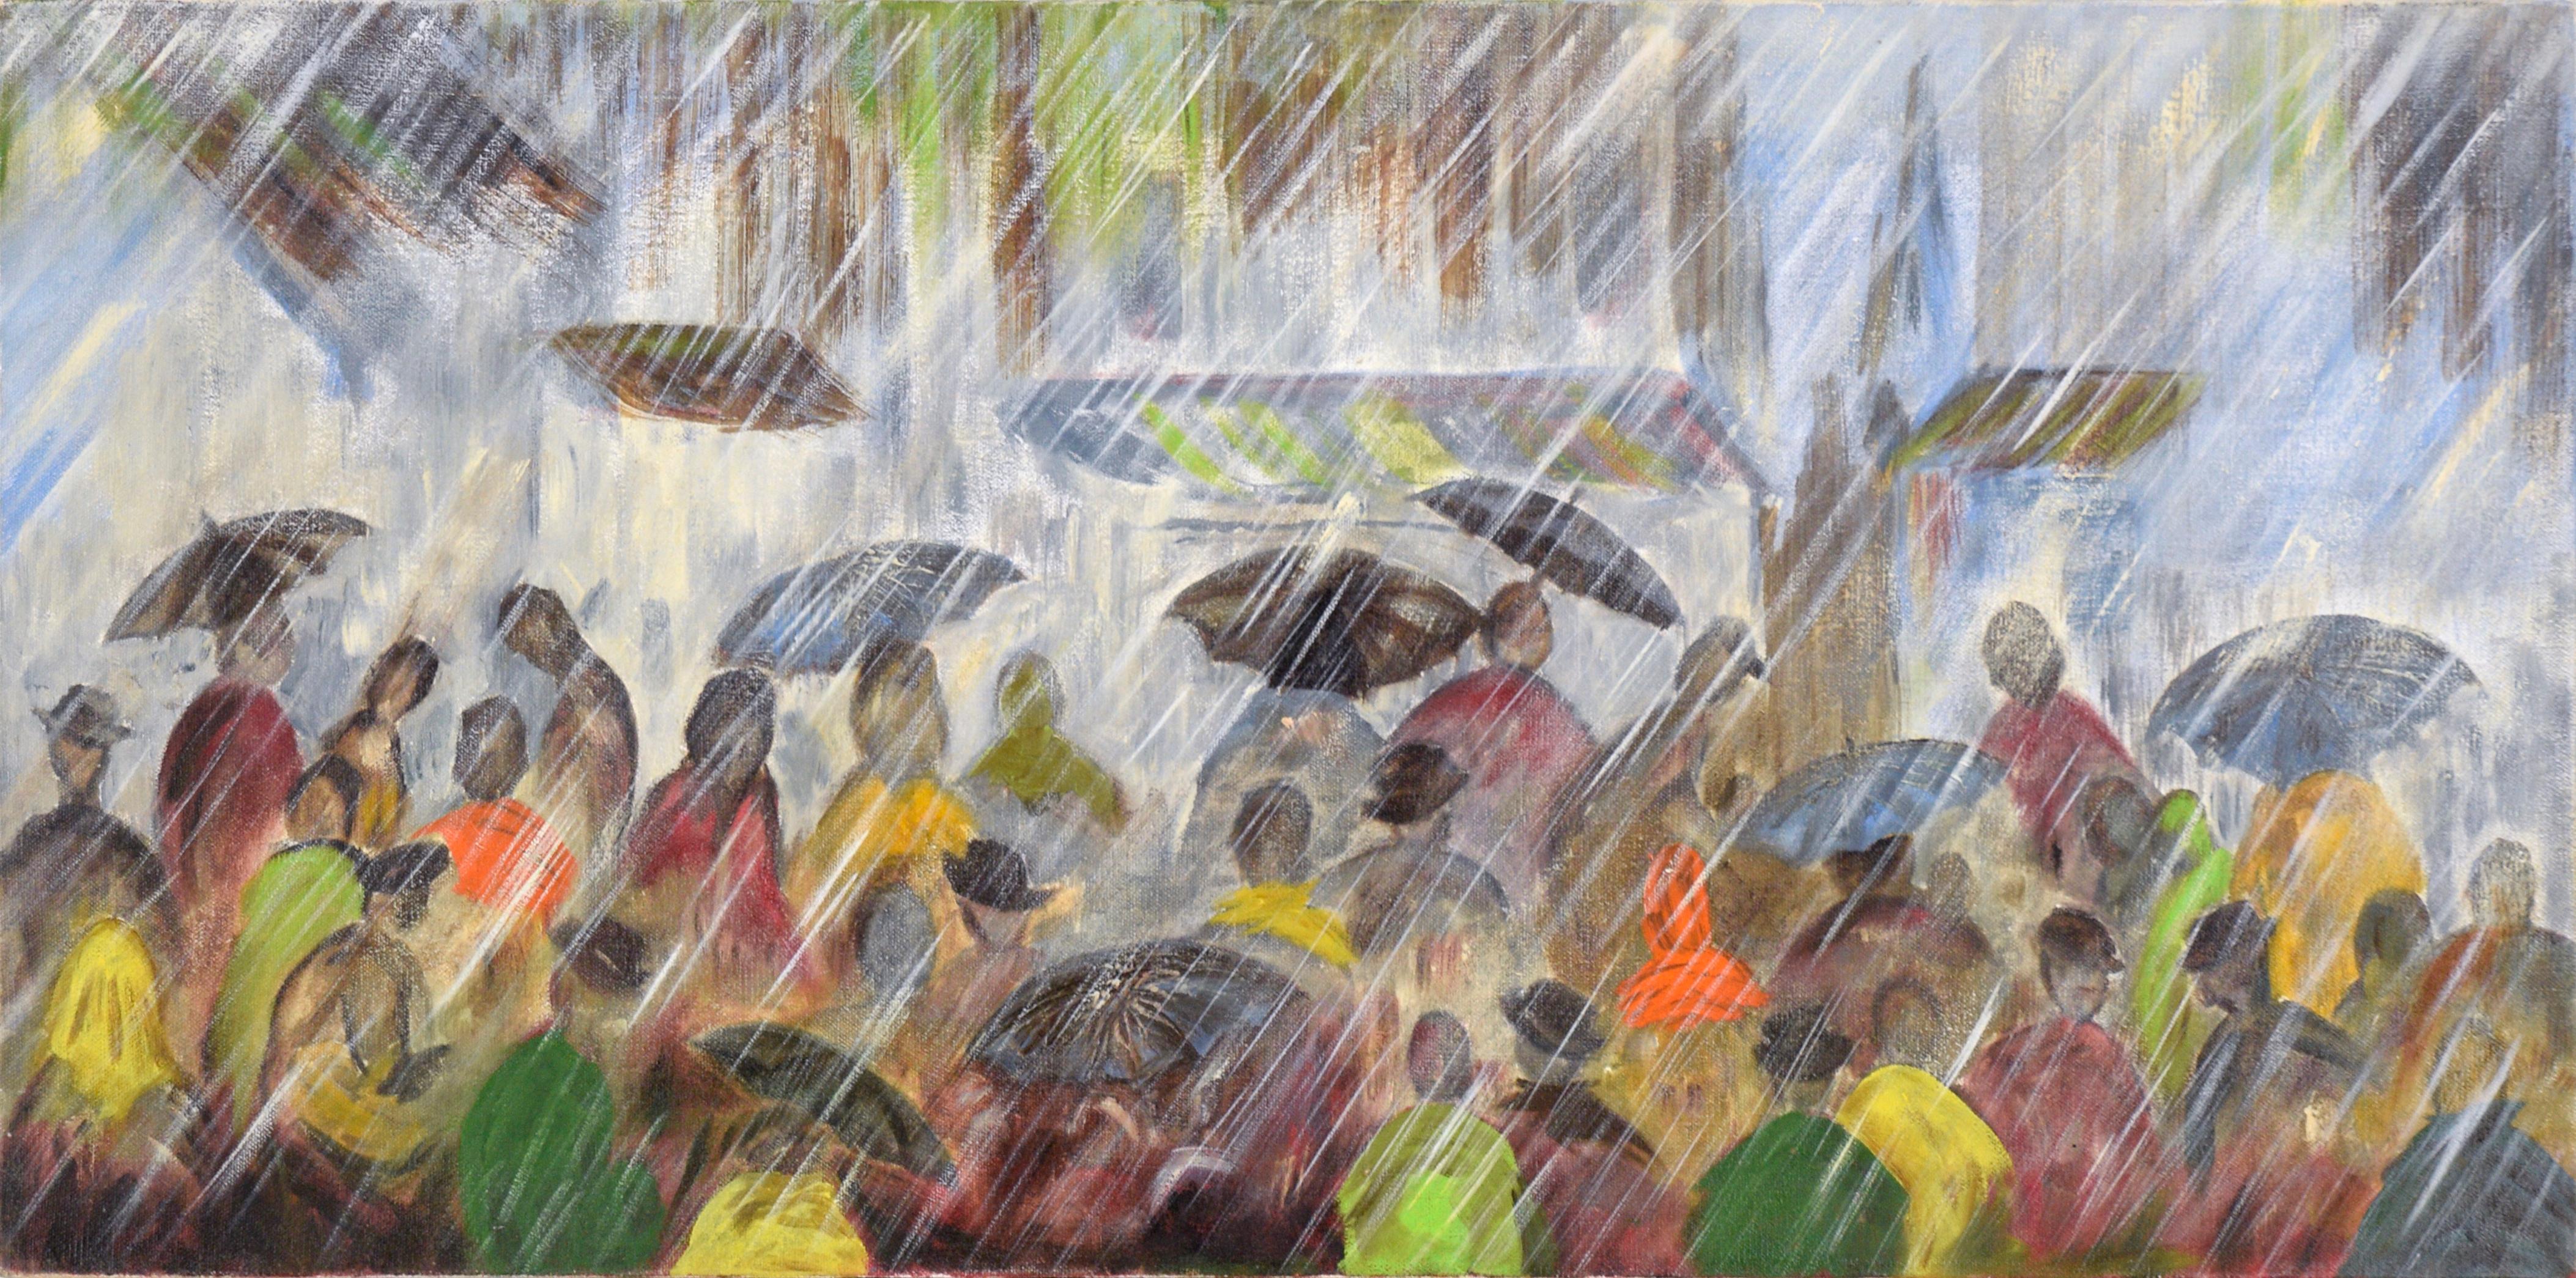 Figurative Painting Unknown - Pouring Down in the Streets - Paysage urbain pluvieux